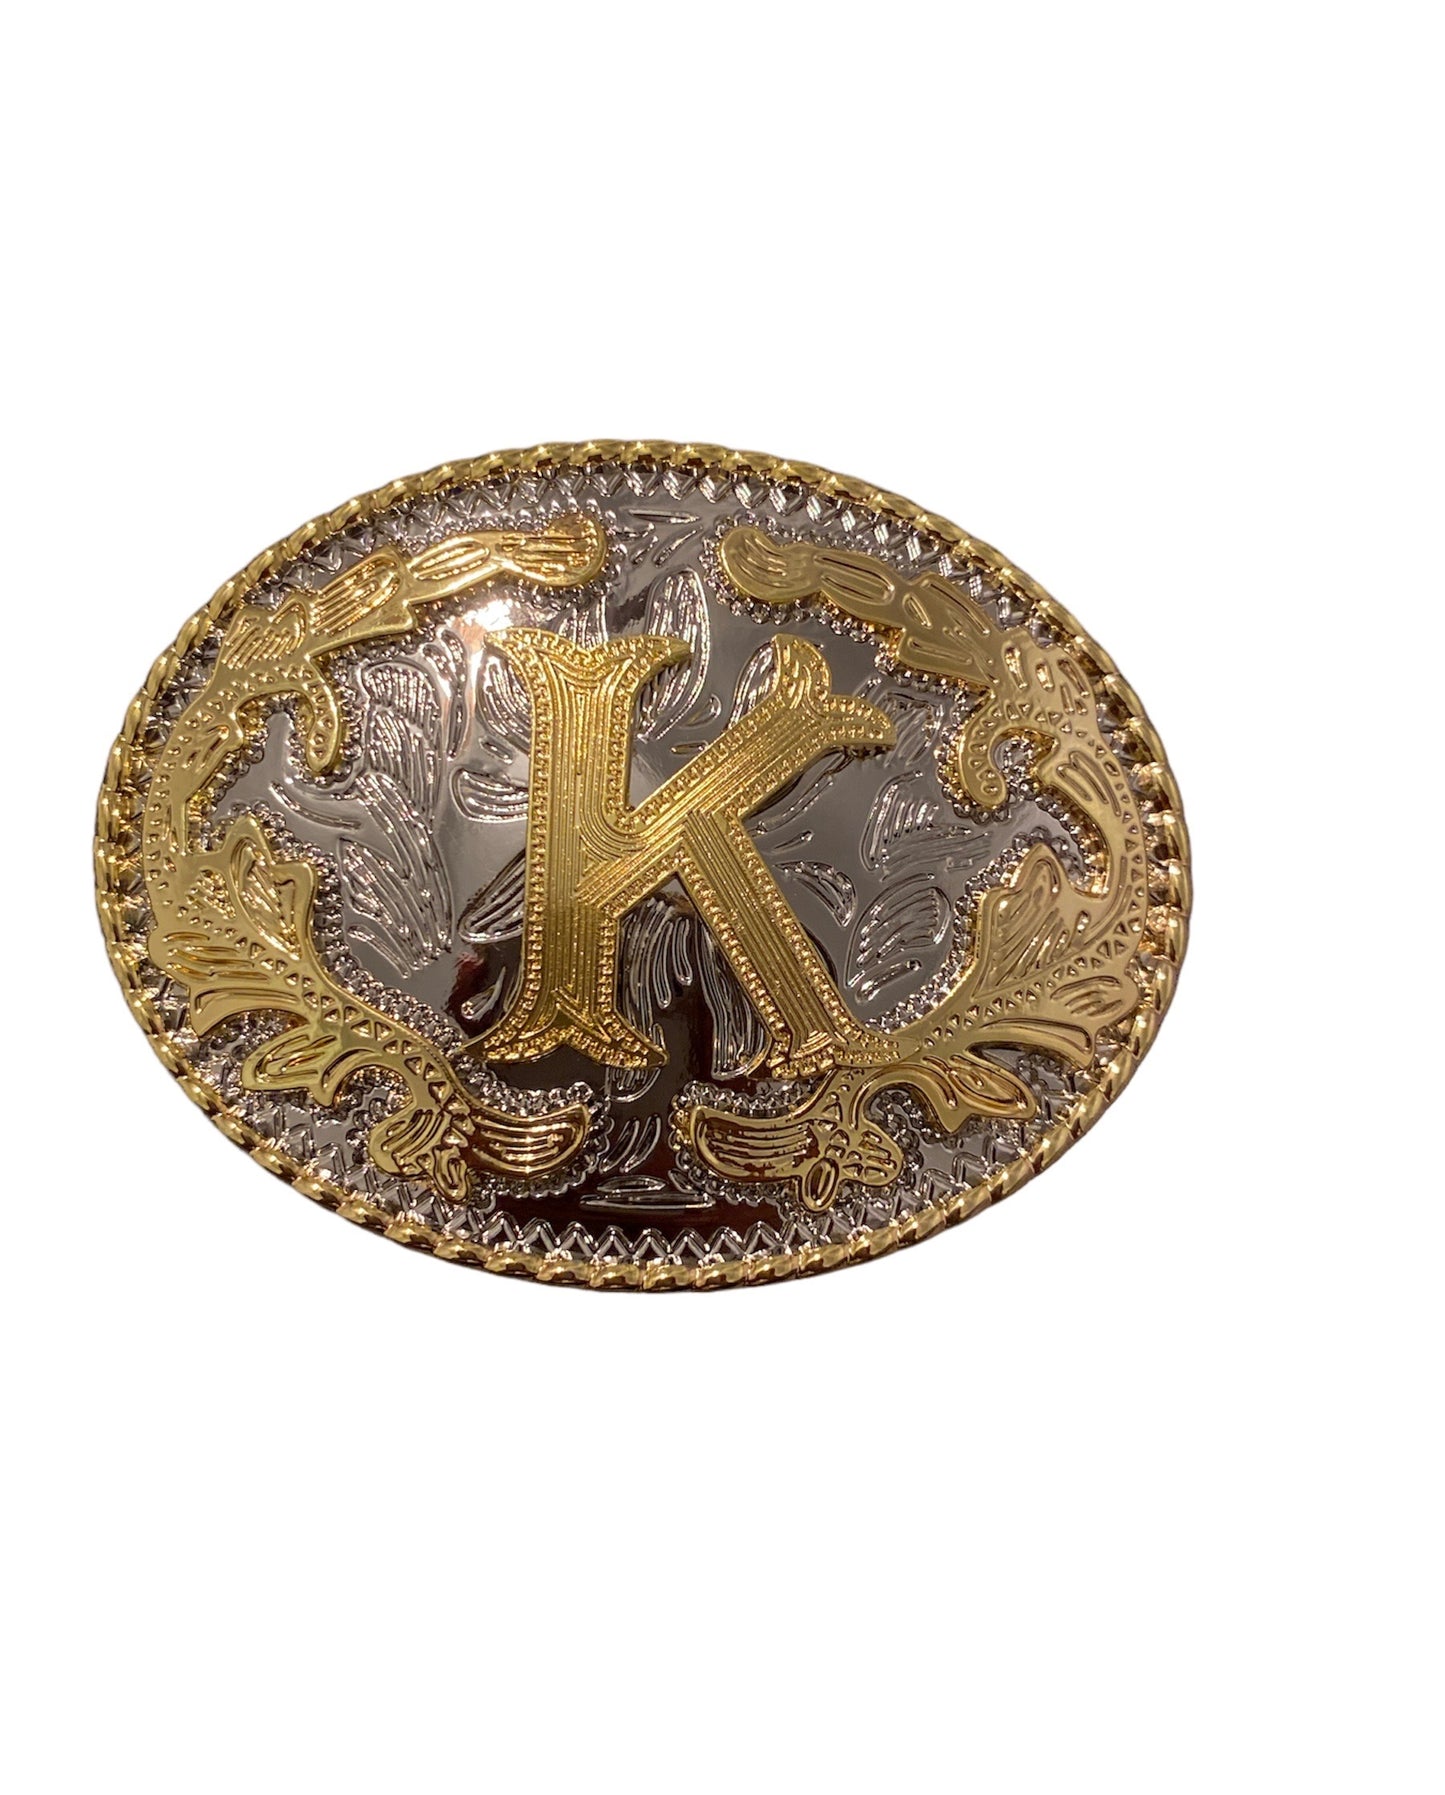 Initial Letter "K" Cowboy Rodeo Western Large Gold Tone Belt Buckle